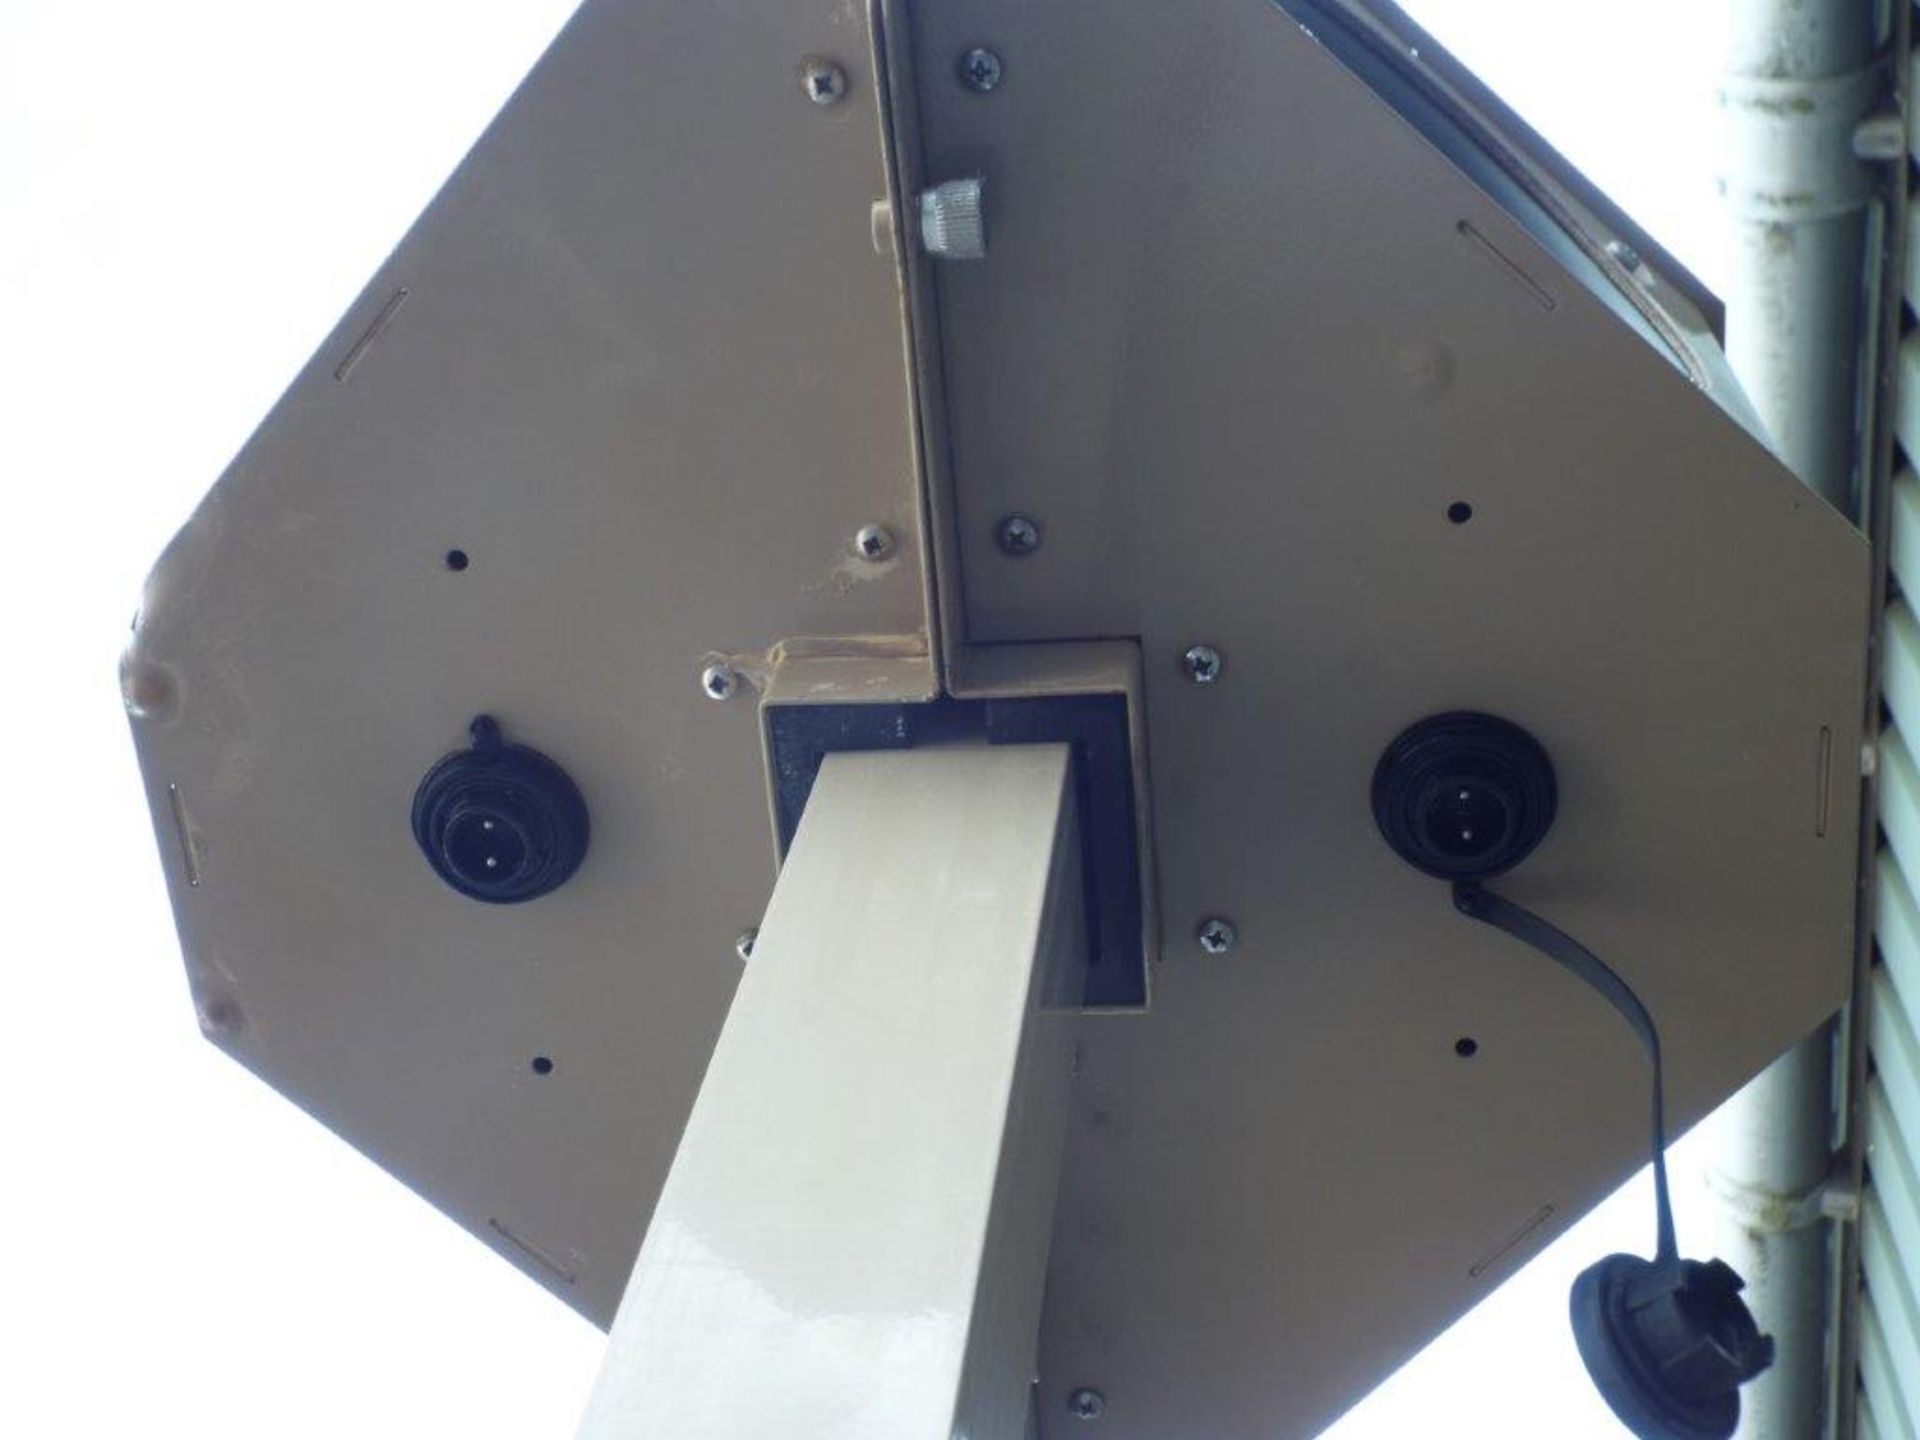 Madahcom Tacwaves Field Station Tower Collapsable Speaker Array - Image 4 of 11